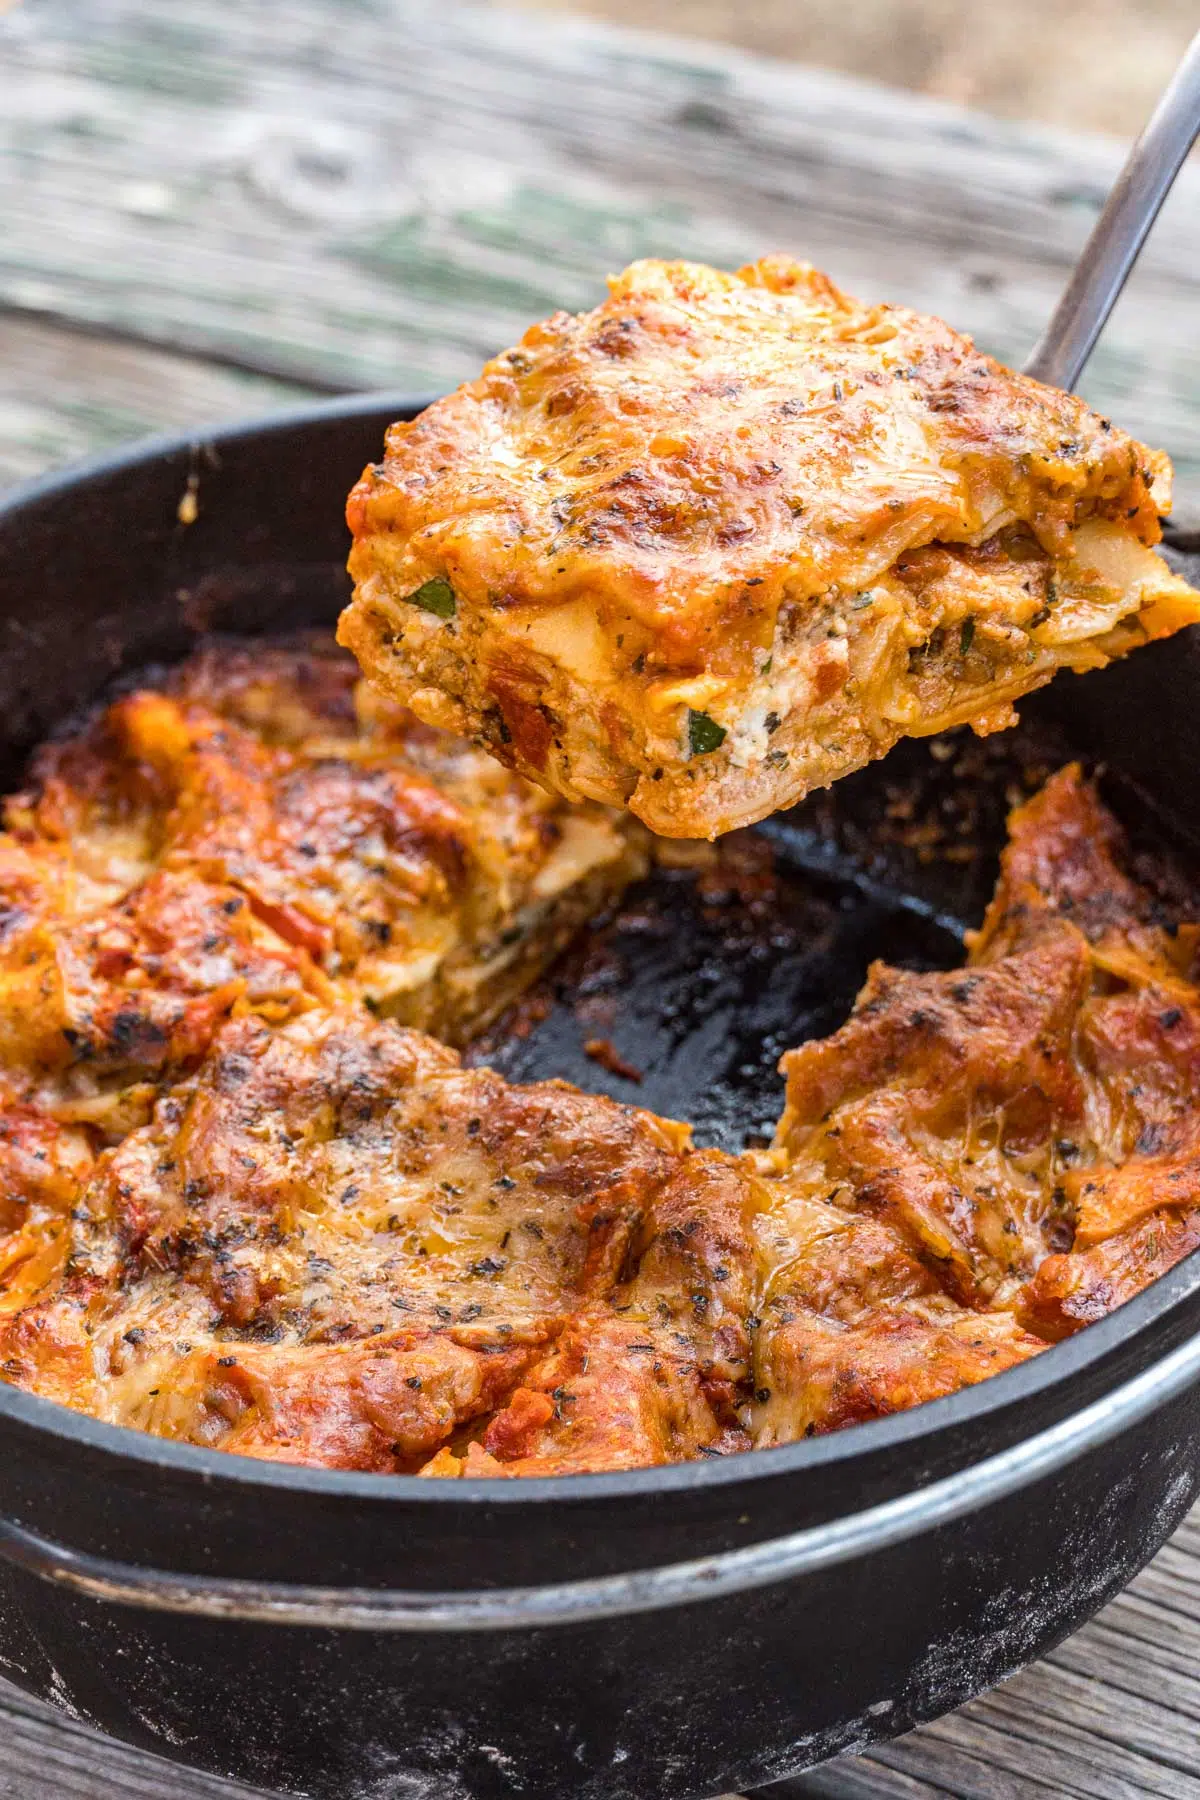 Lifting a slice of lasagna out of a Dutch oven